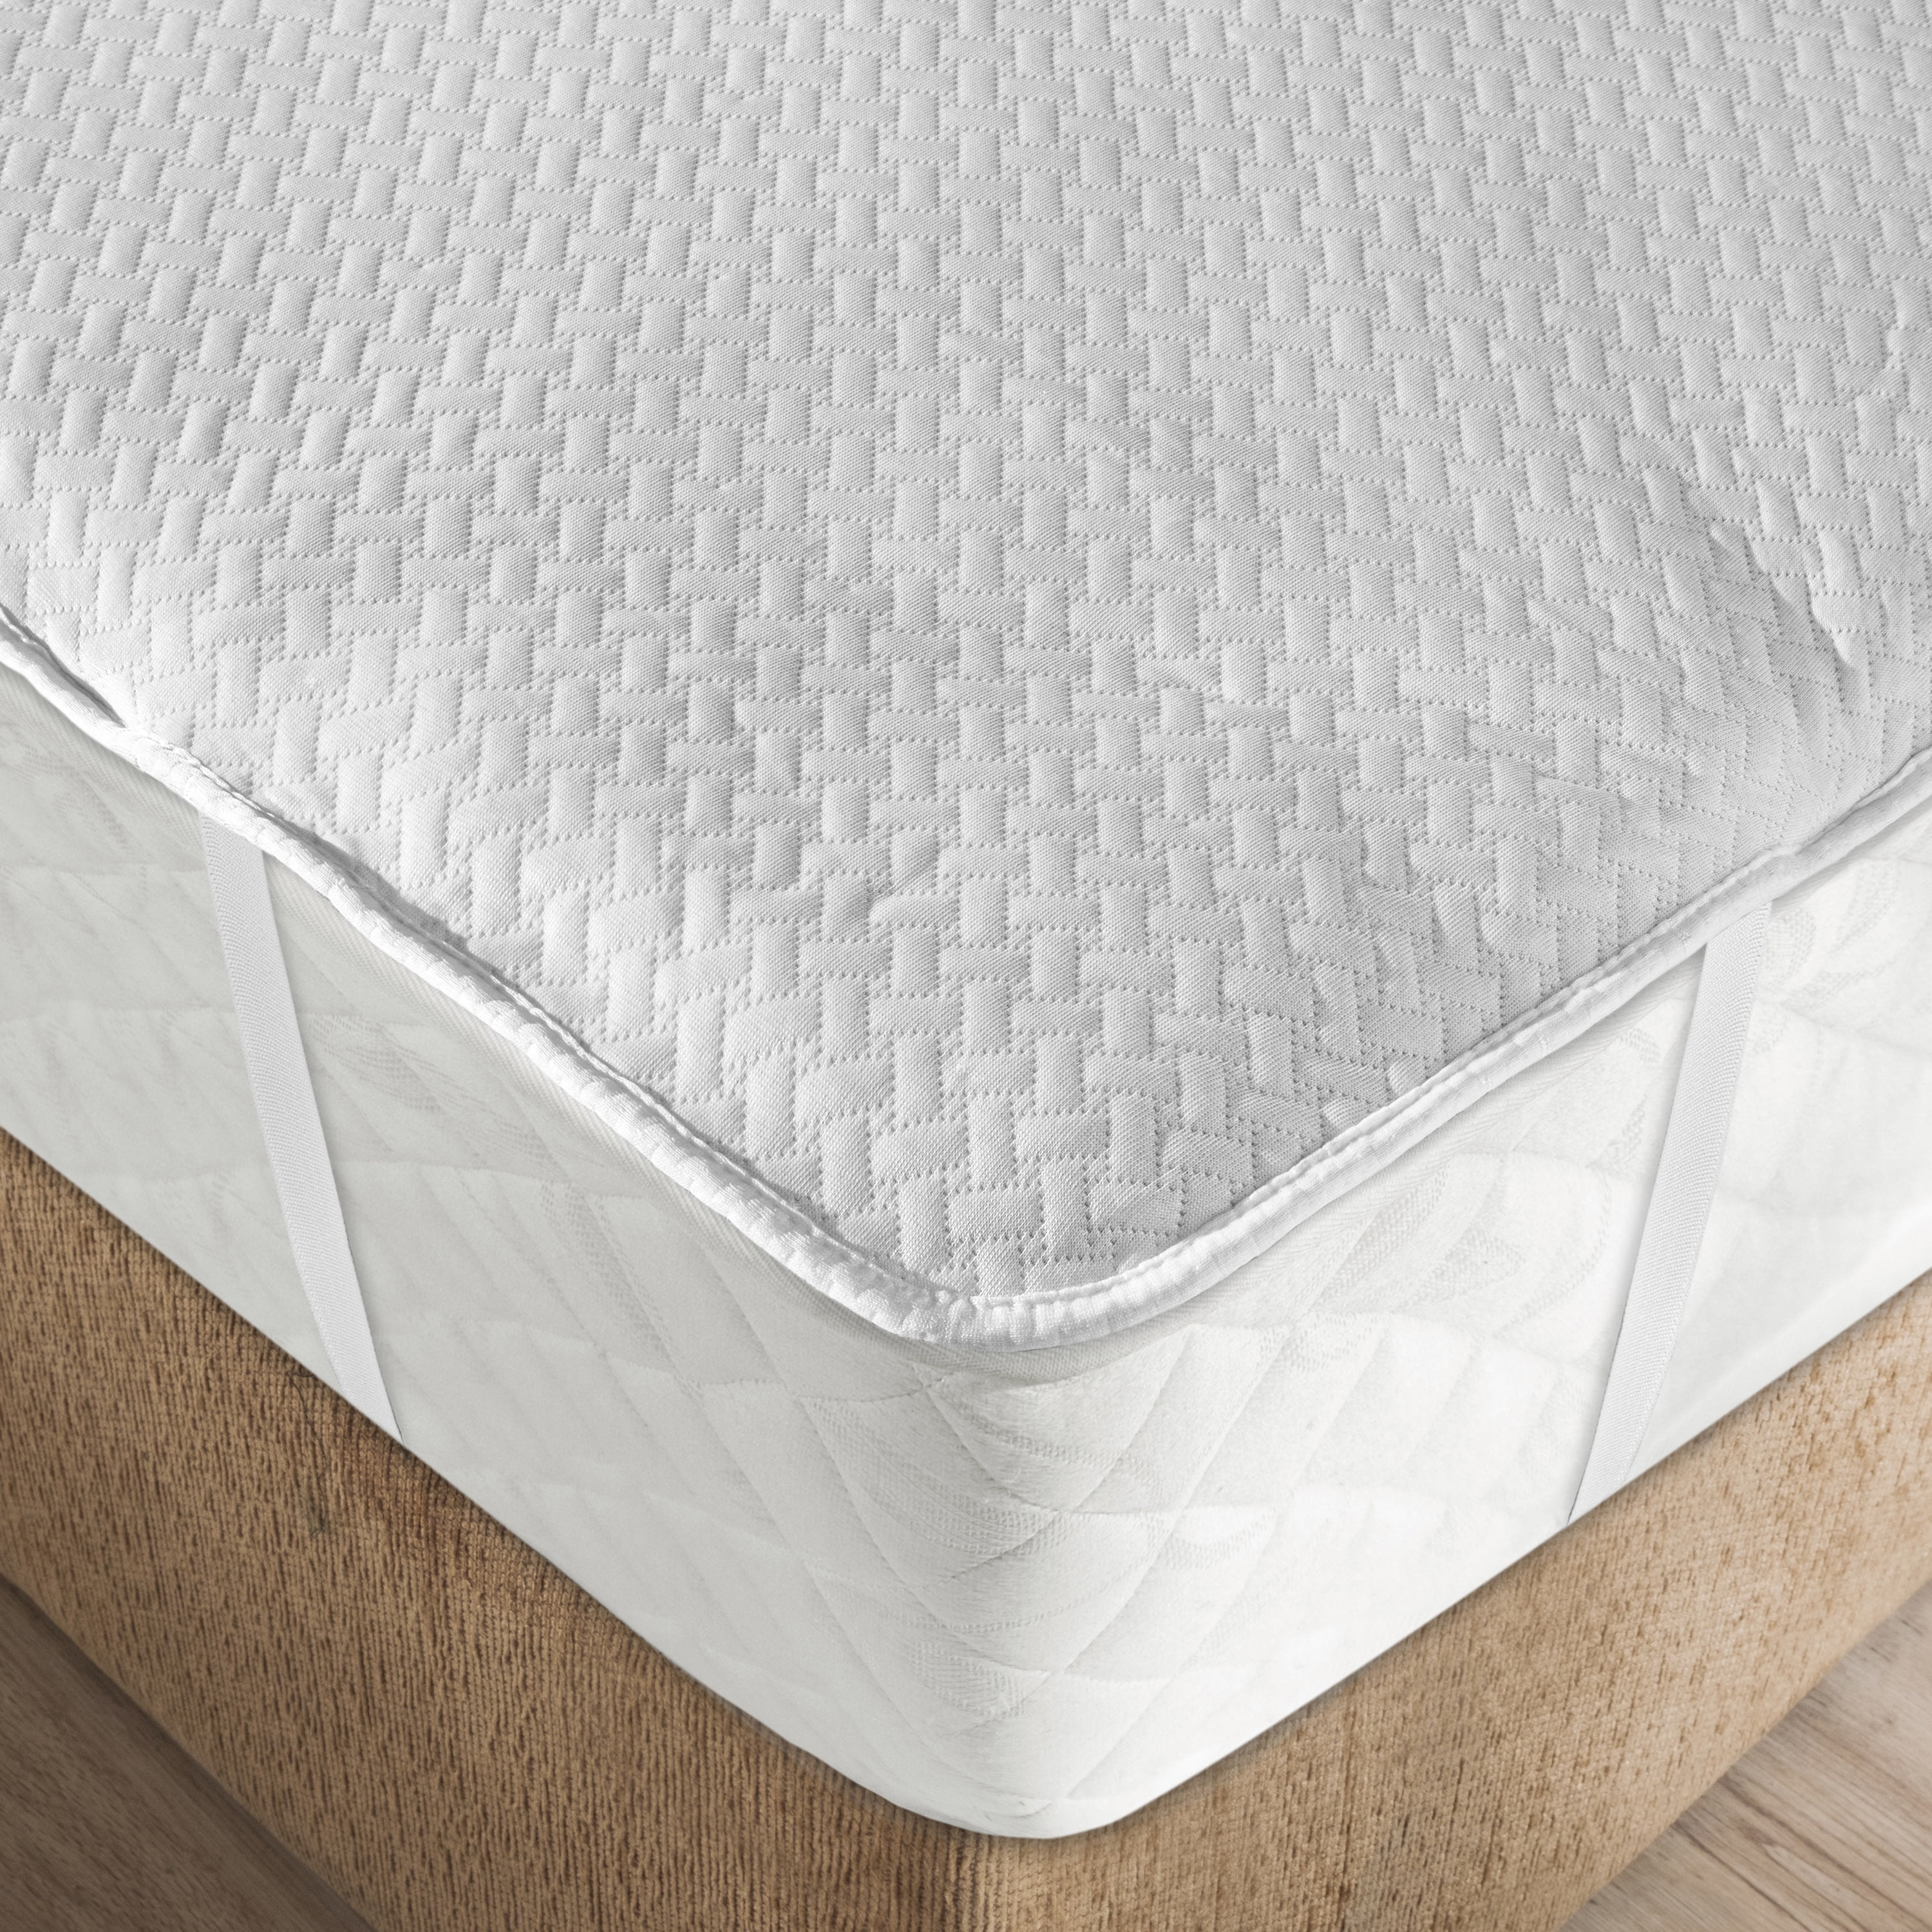 LUXURY EXTRA DEEP 12" QUILTED MATTRESS PROTECTOR FITTED SHEET BED COVER ALL SIZE 